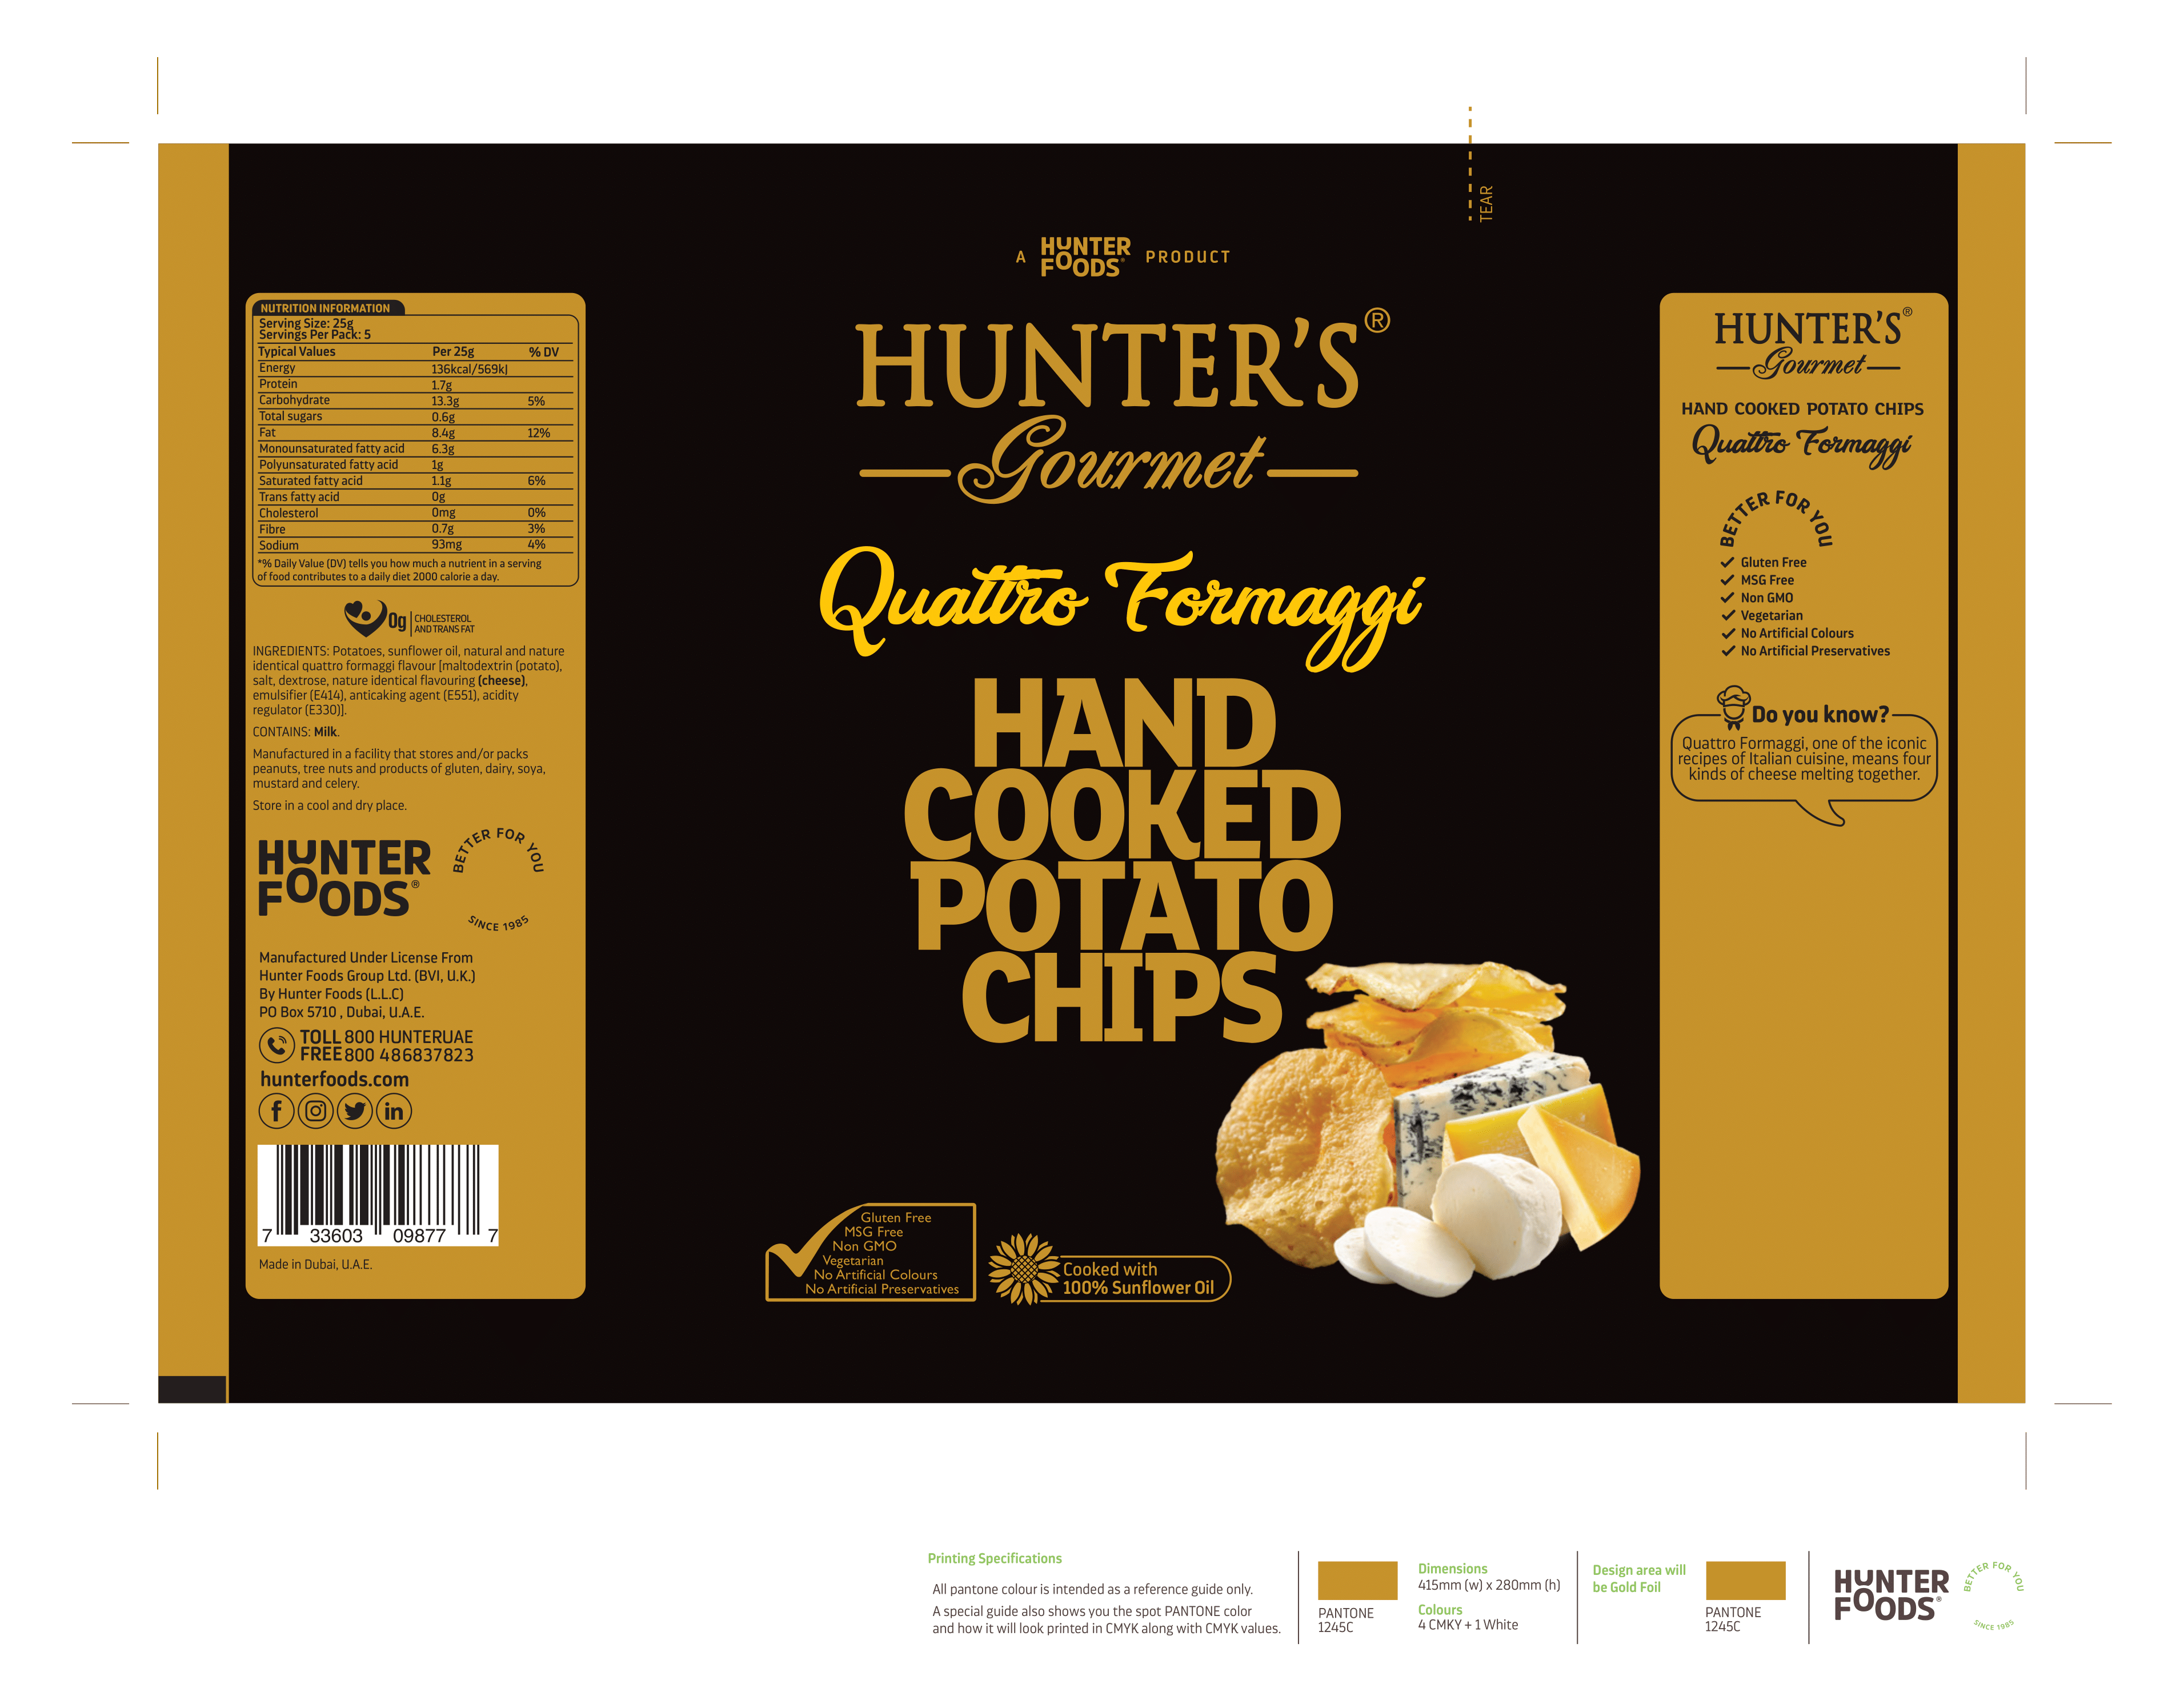 Hunter's Gourmet Hand Cooked Potato Chips Quattro Formaggi 12 units per case 125 g Product Label